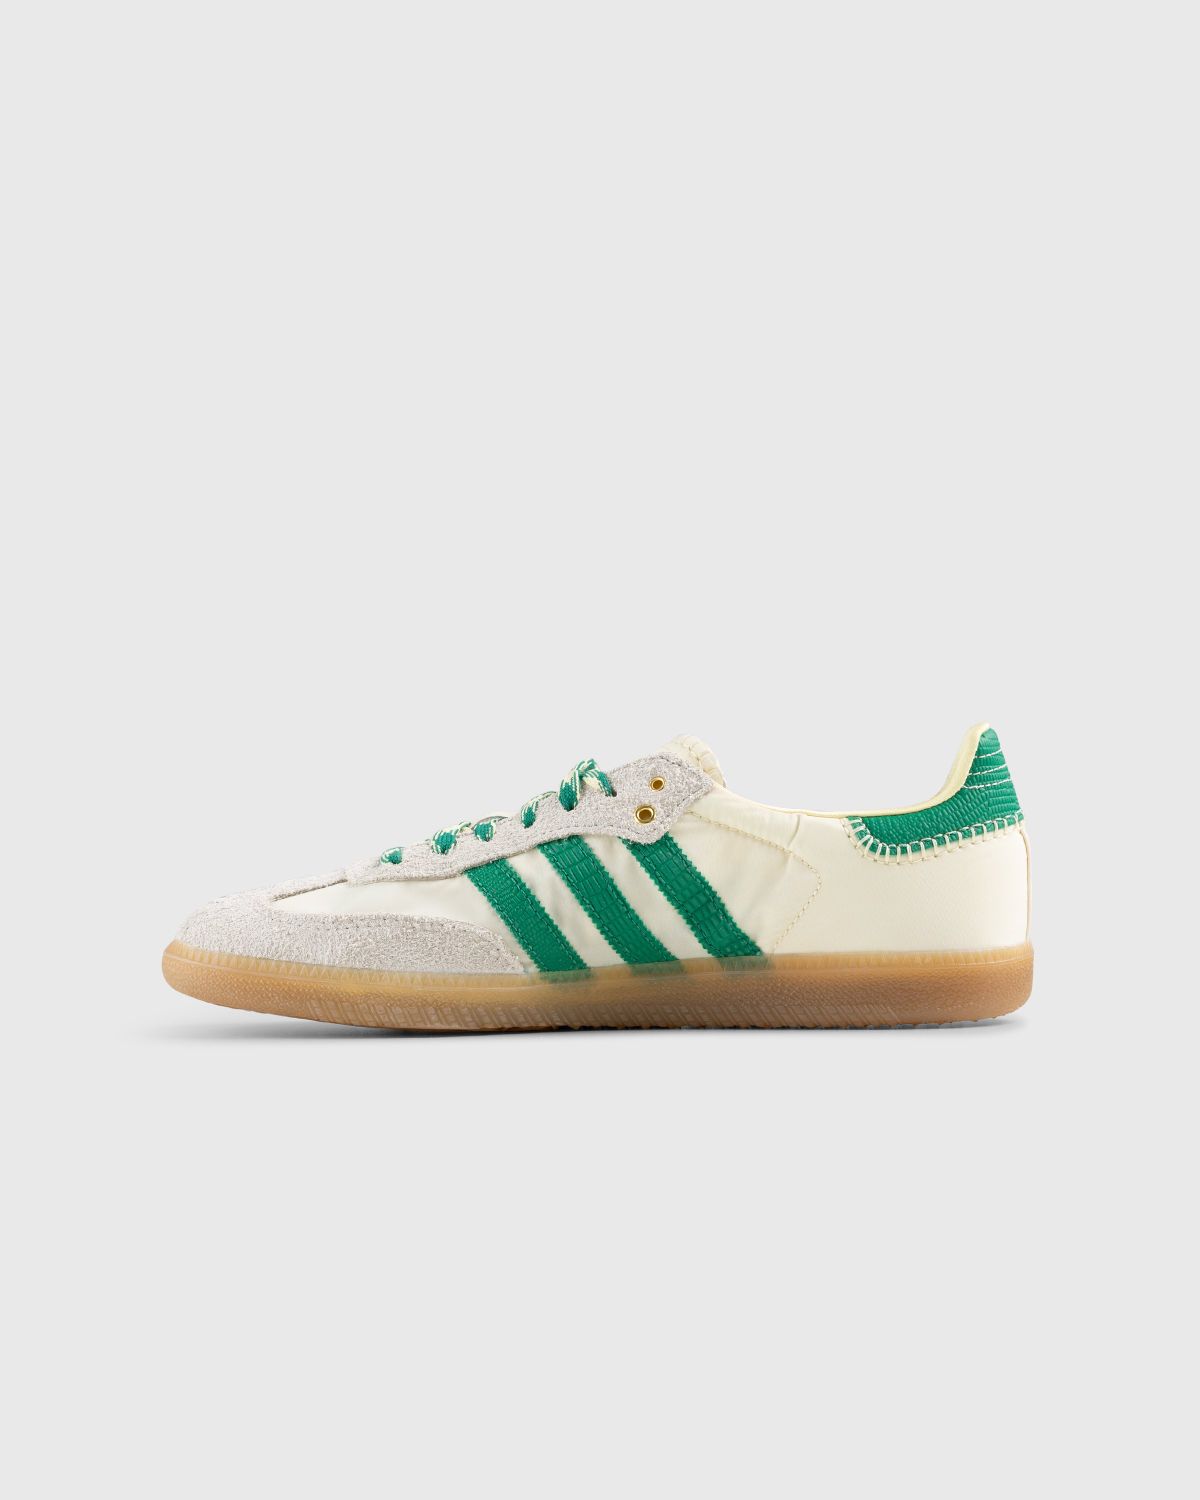 Adidas x Wales Bonner – WB Samba Cream White/Bold Green/Easy Yellow - Low Top Sneakers - Beige - Image 2